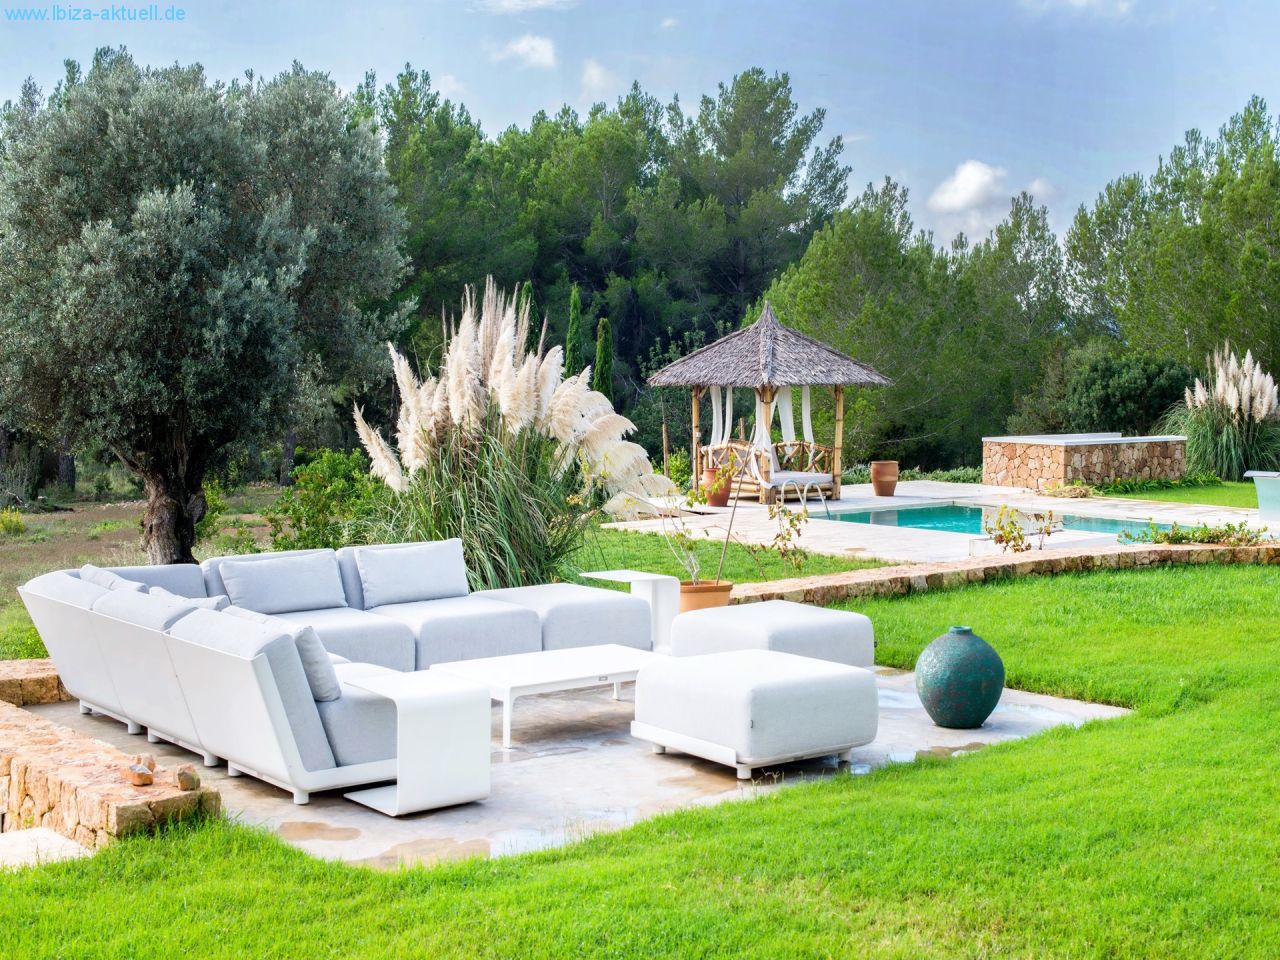 modern sofagroup on the terace infront of the house and large lawn